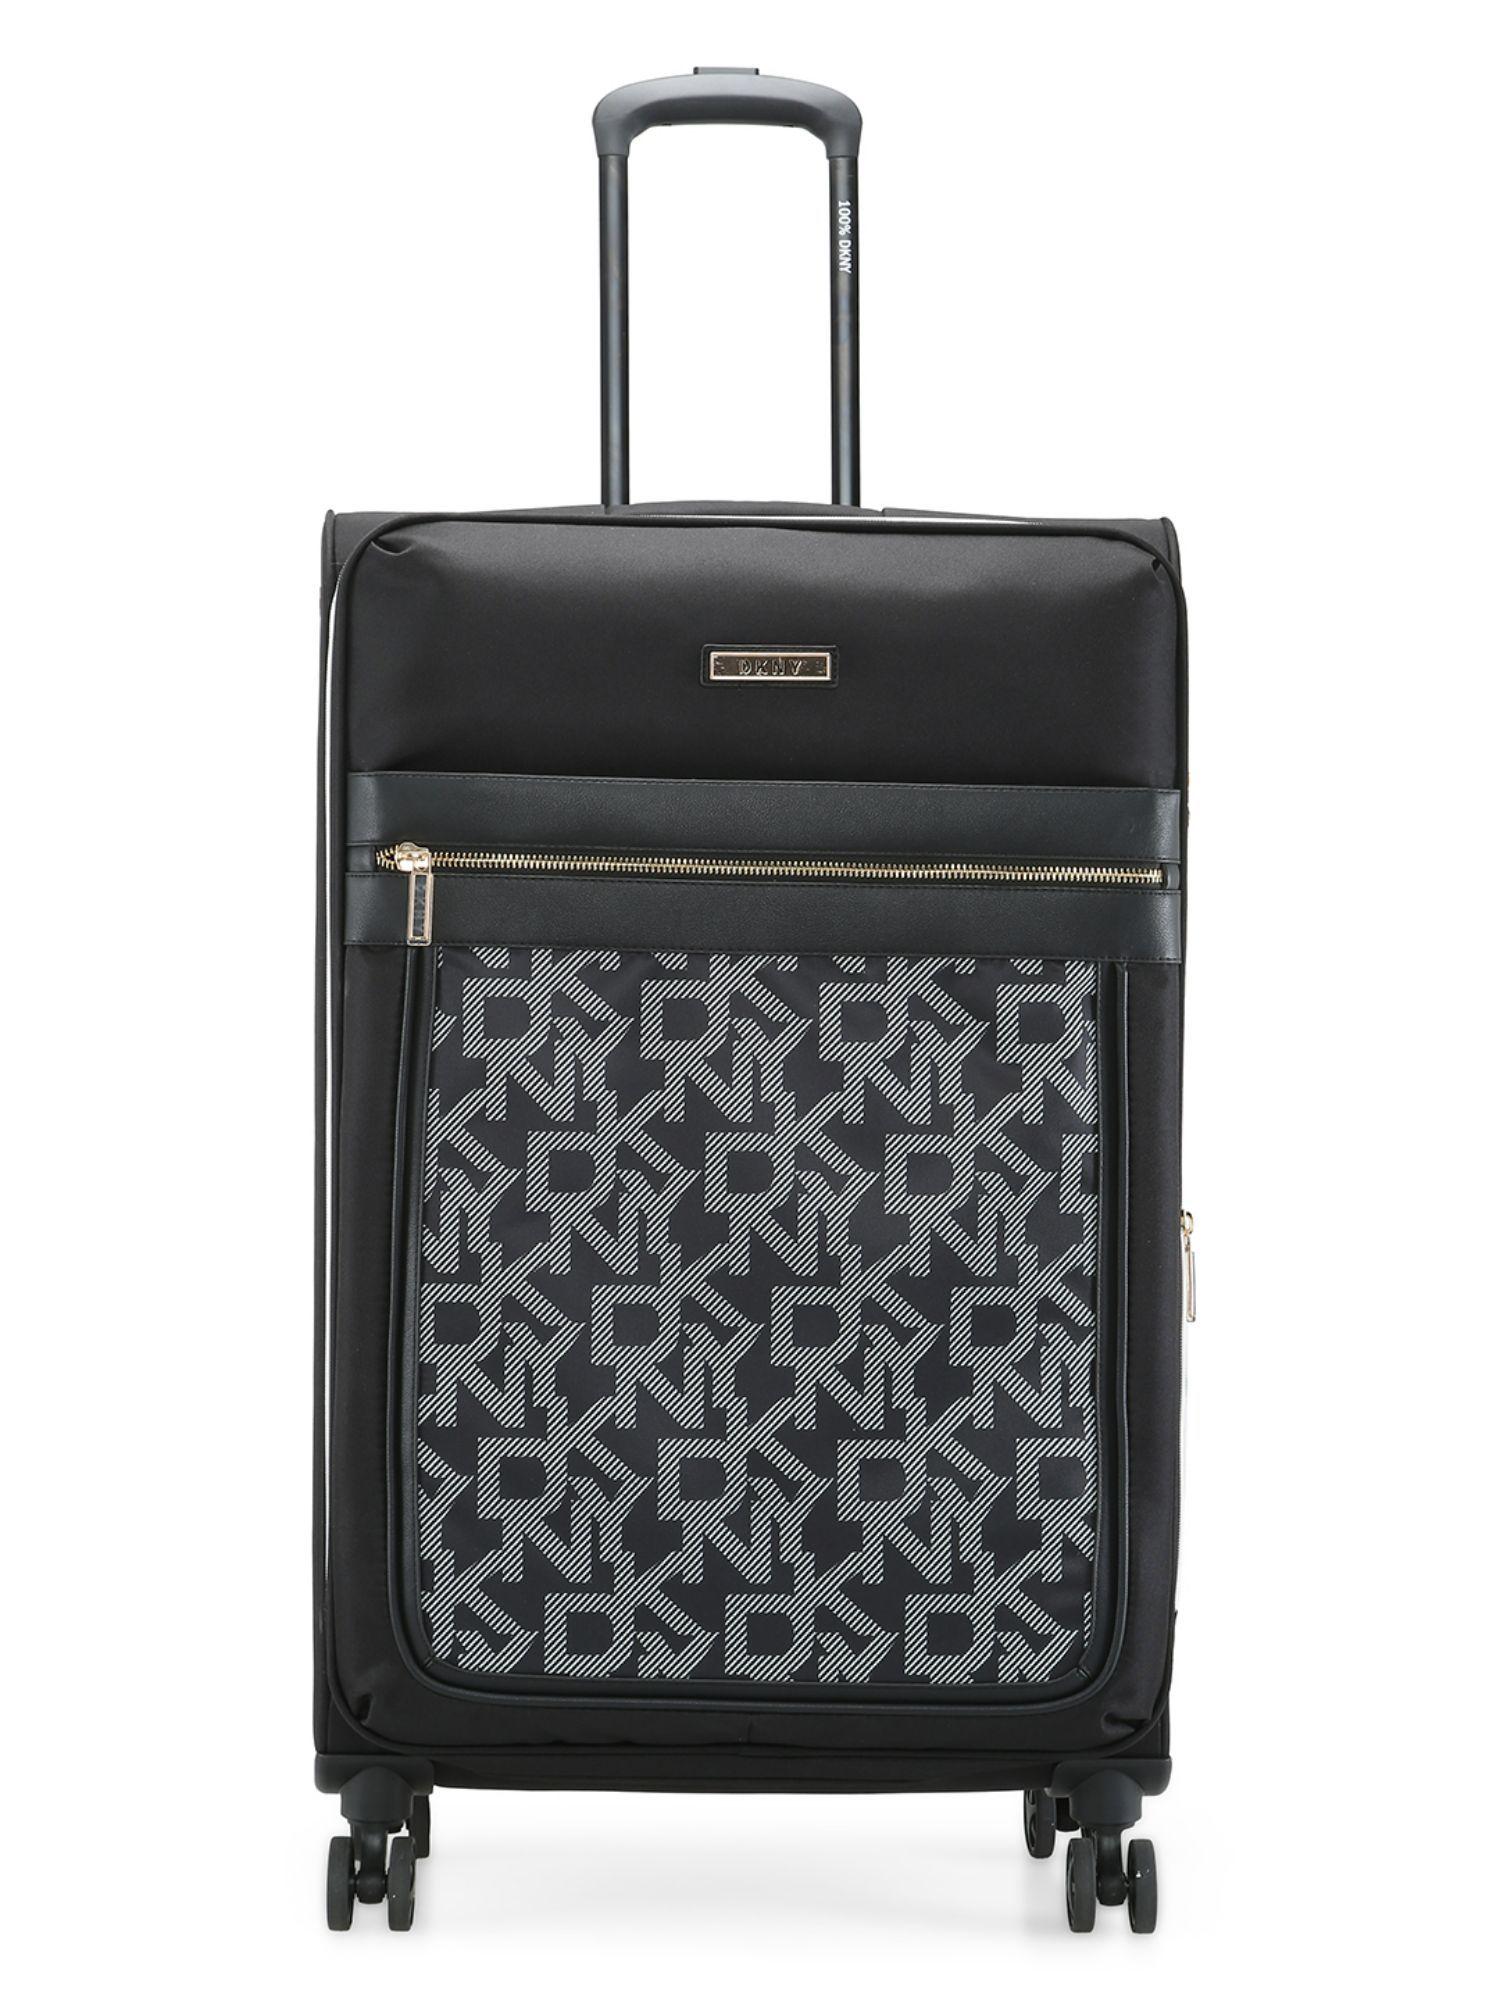 after-hours-black-logo-print-soft-side-polyester-twill-material-21-cabin-trolley